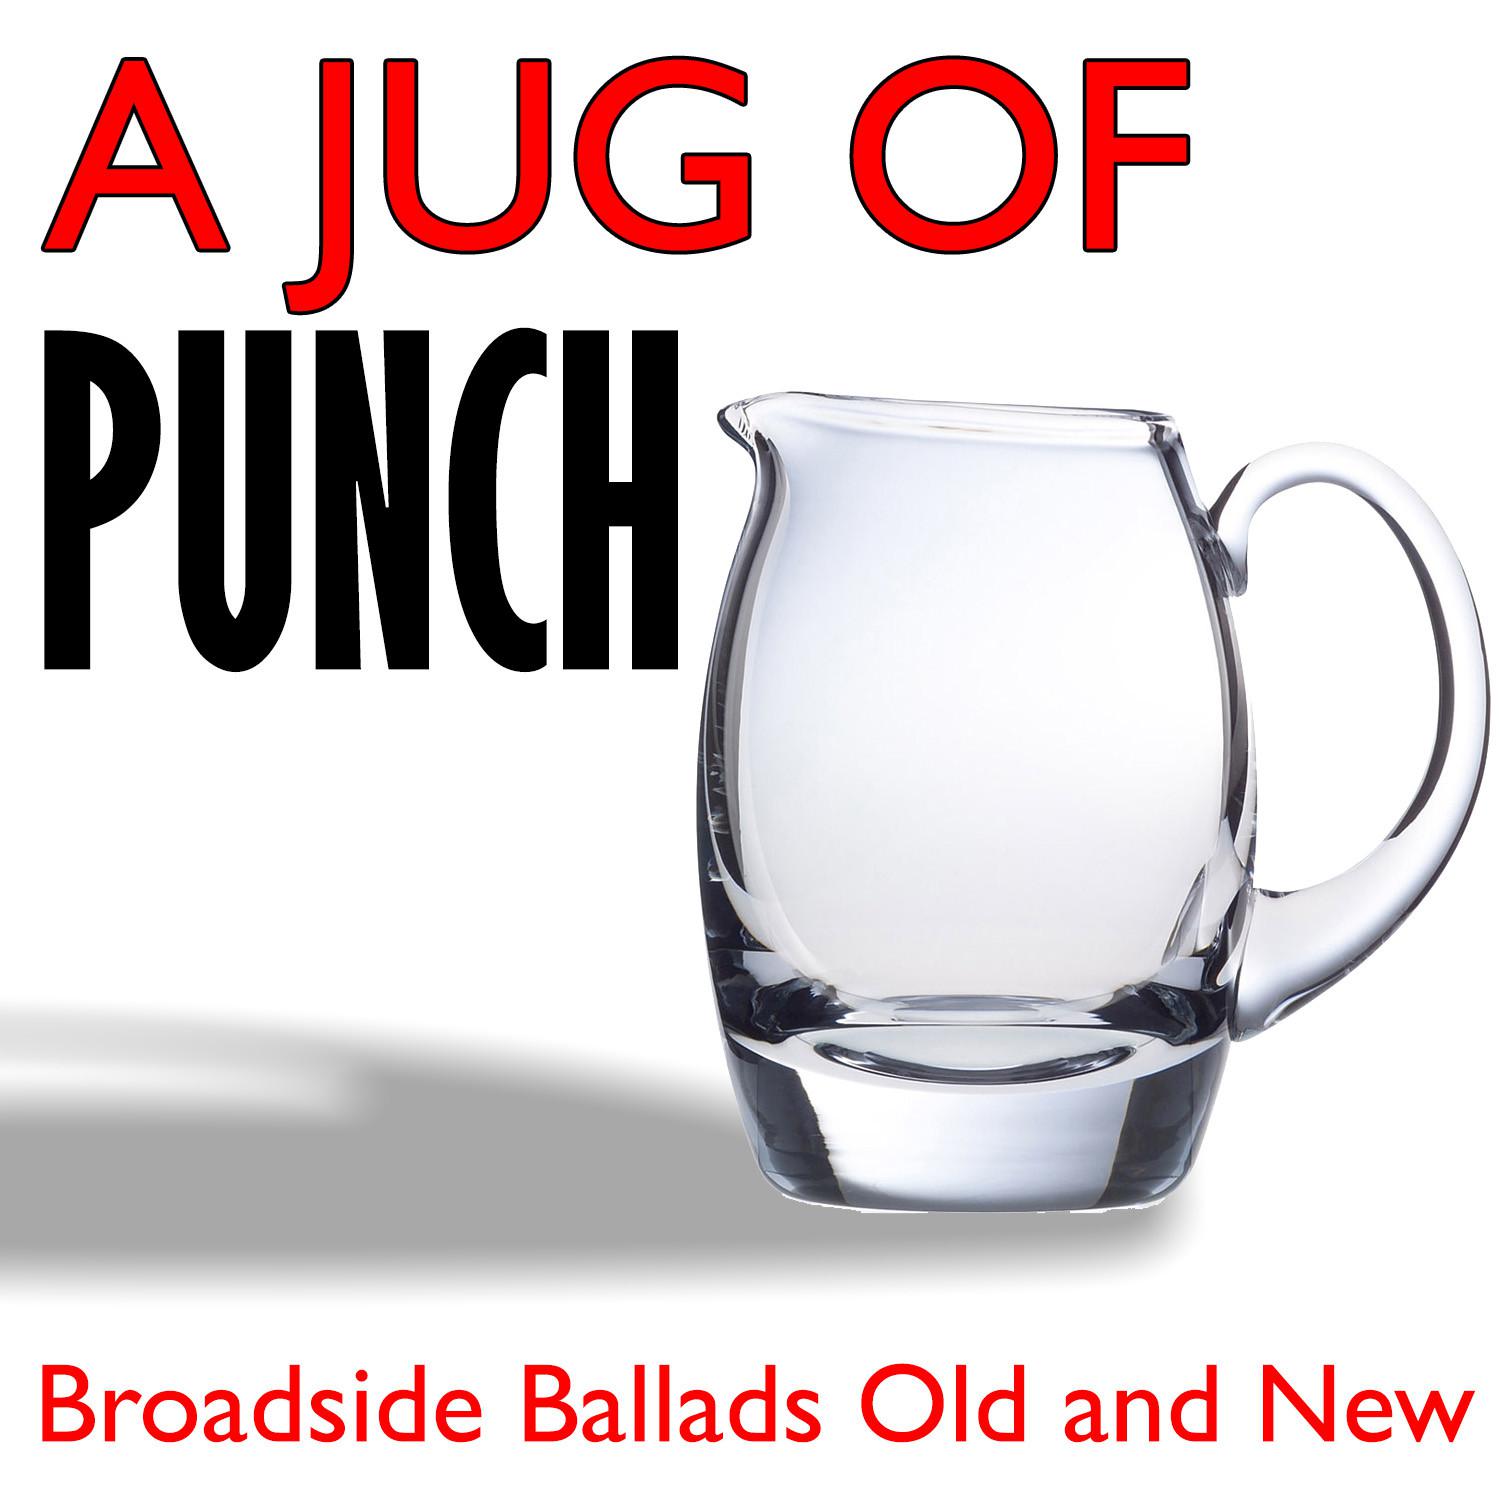 A Jug of Punch - Broadside Ballads Old and New